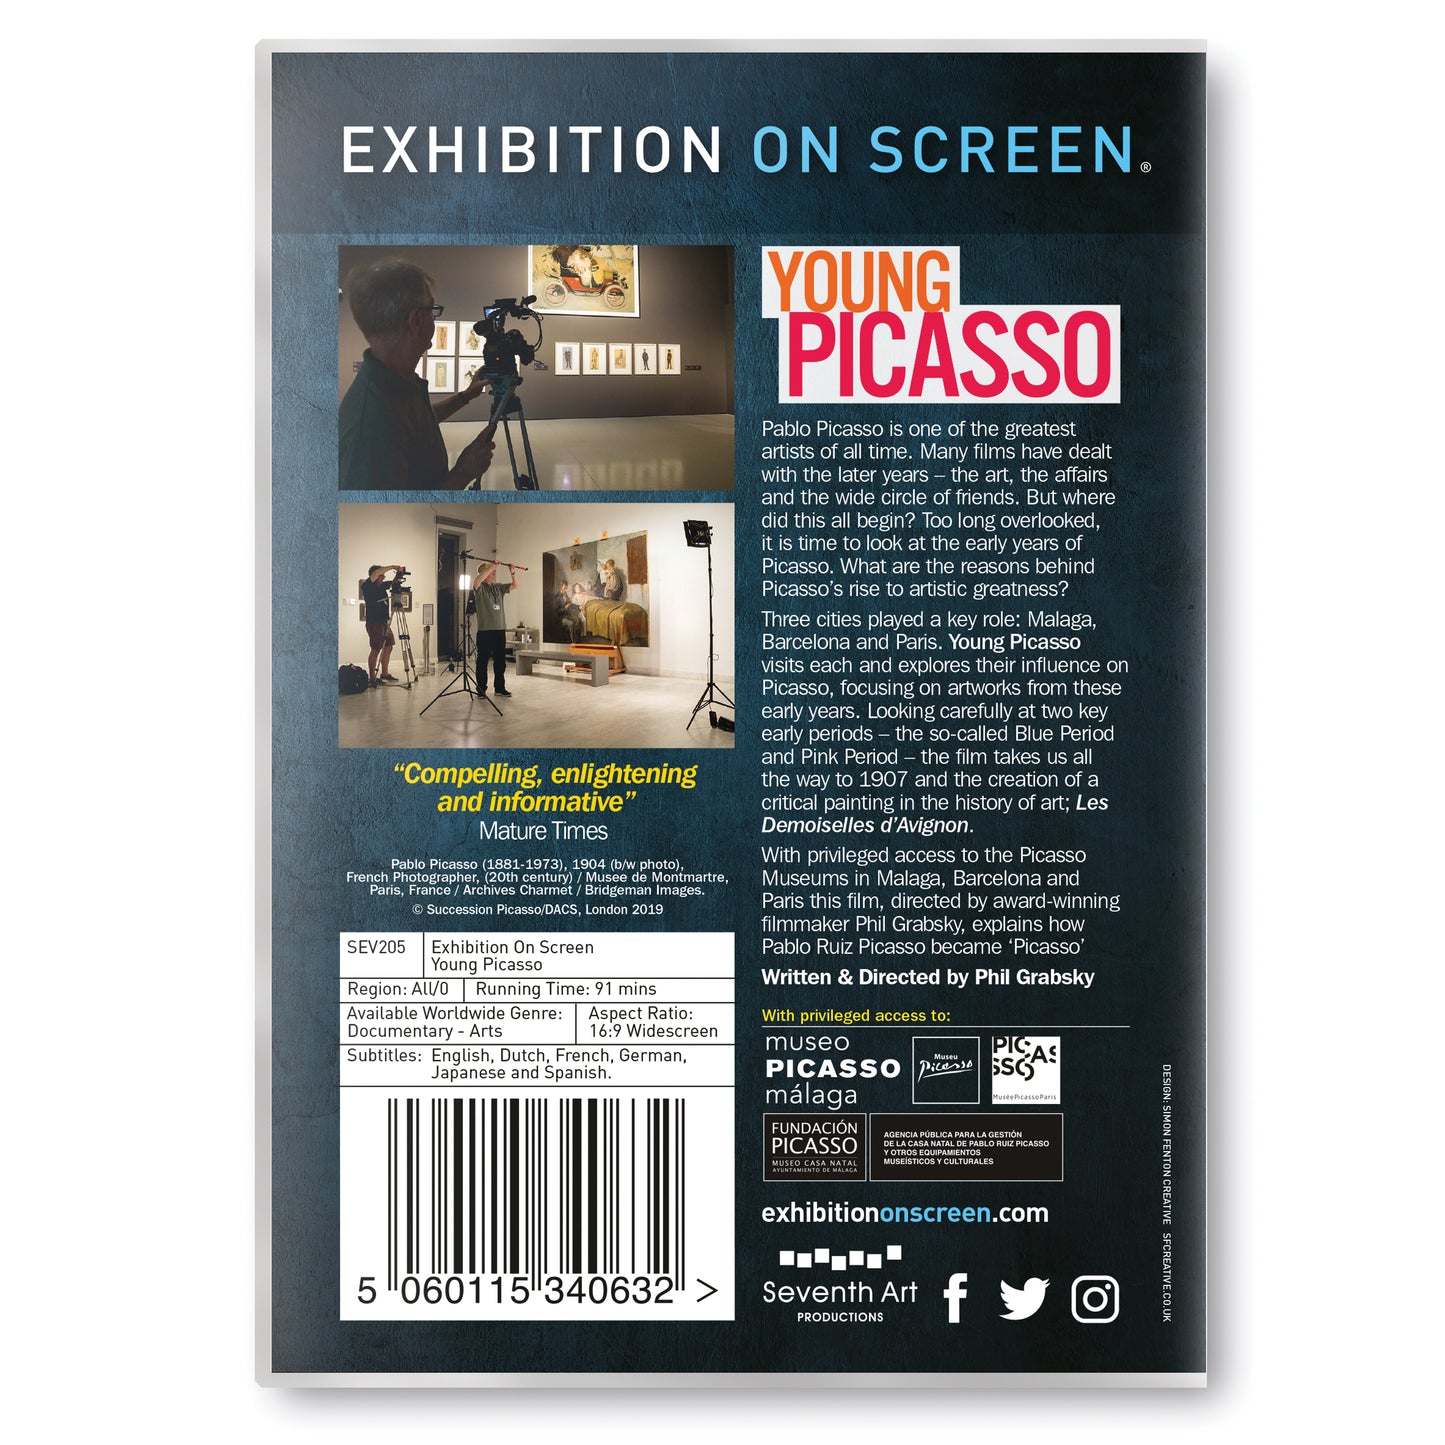 Exhibition On Screen - Young Picasso